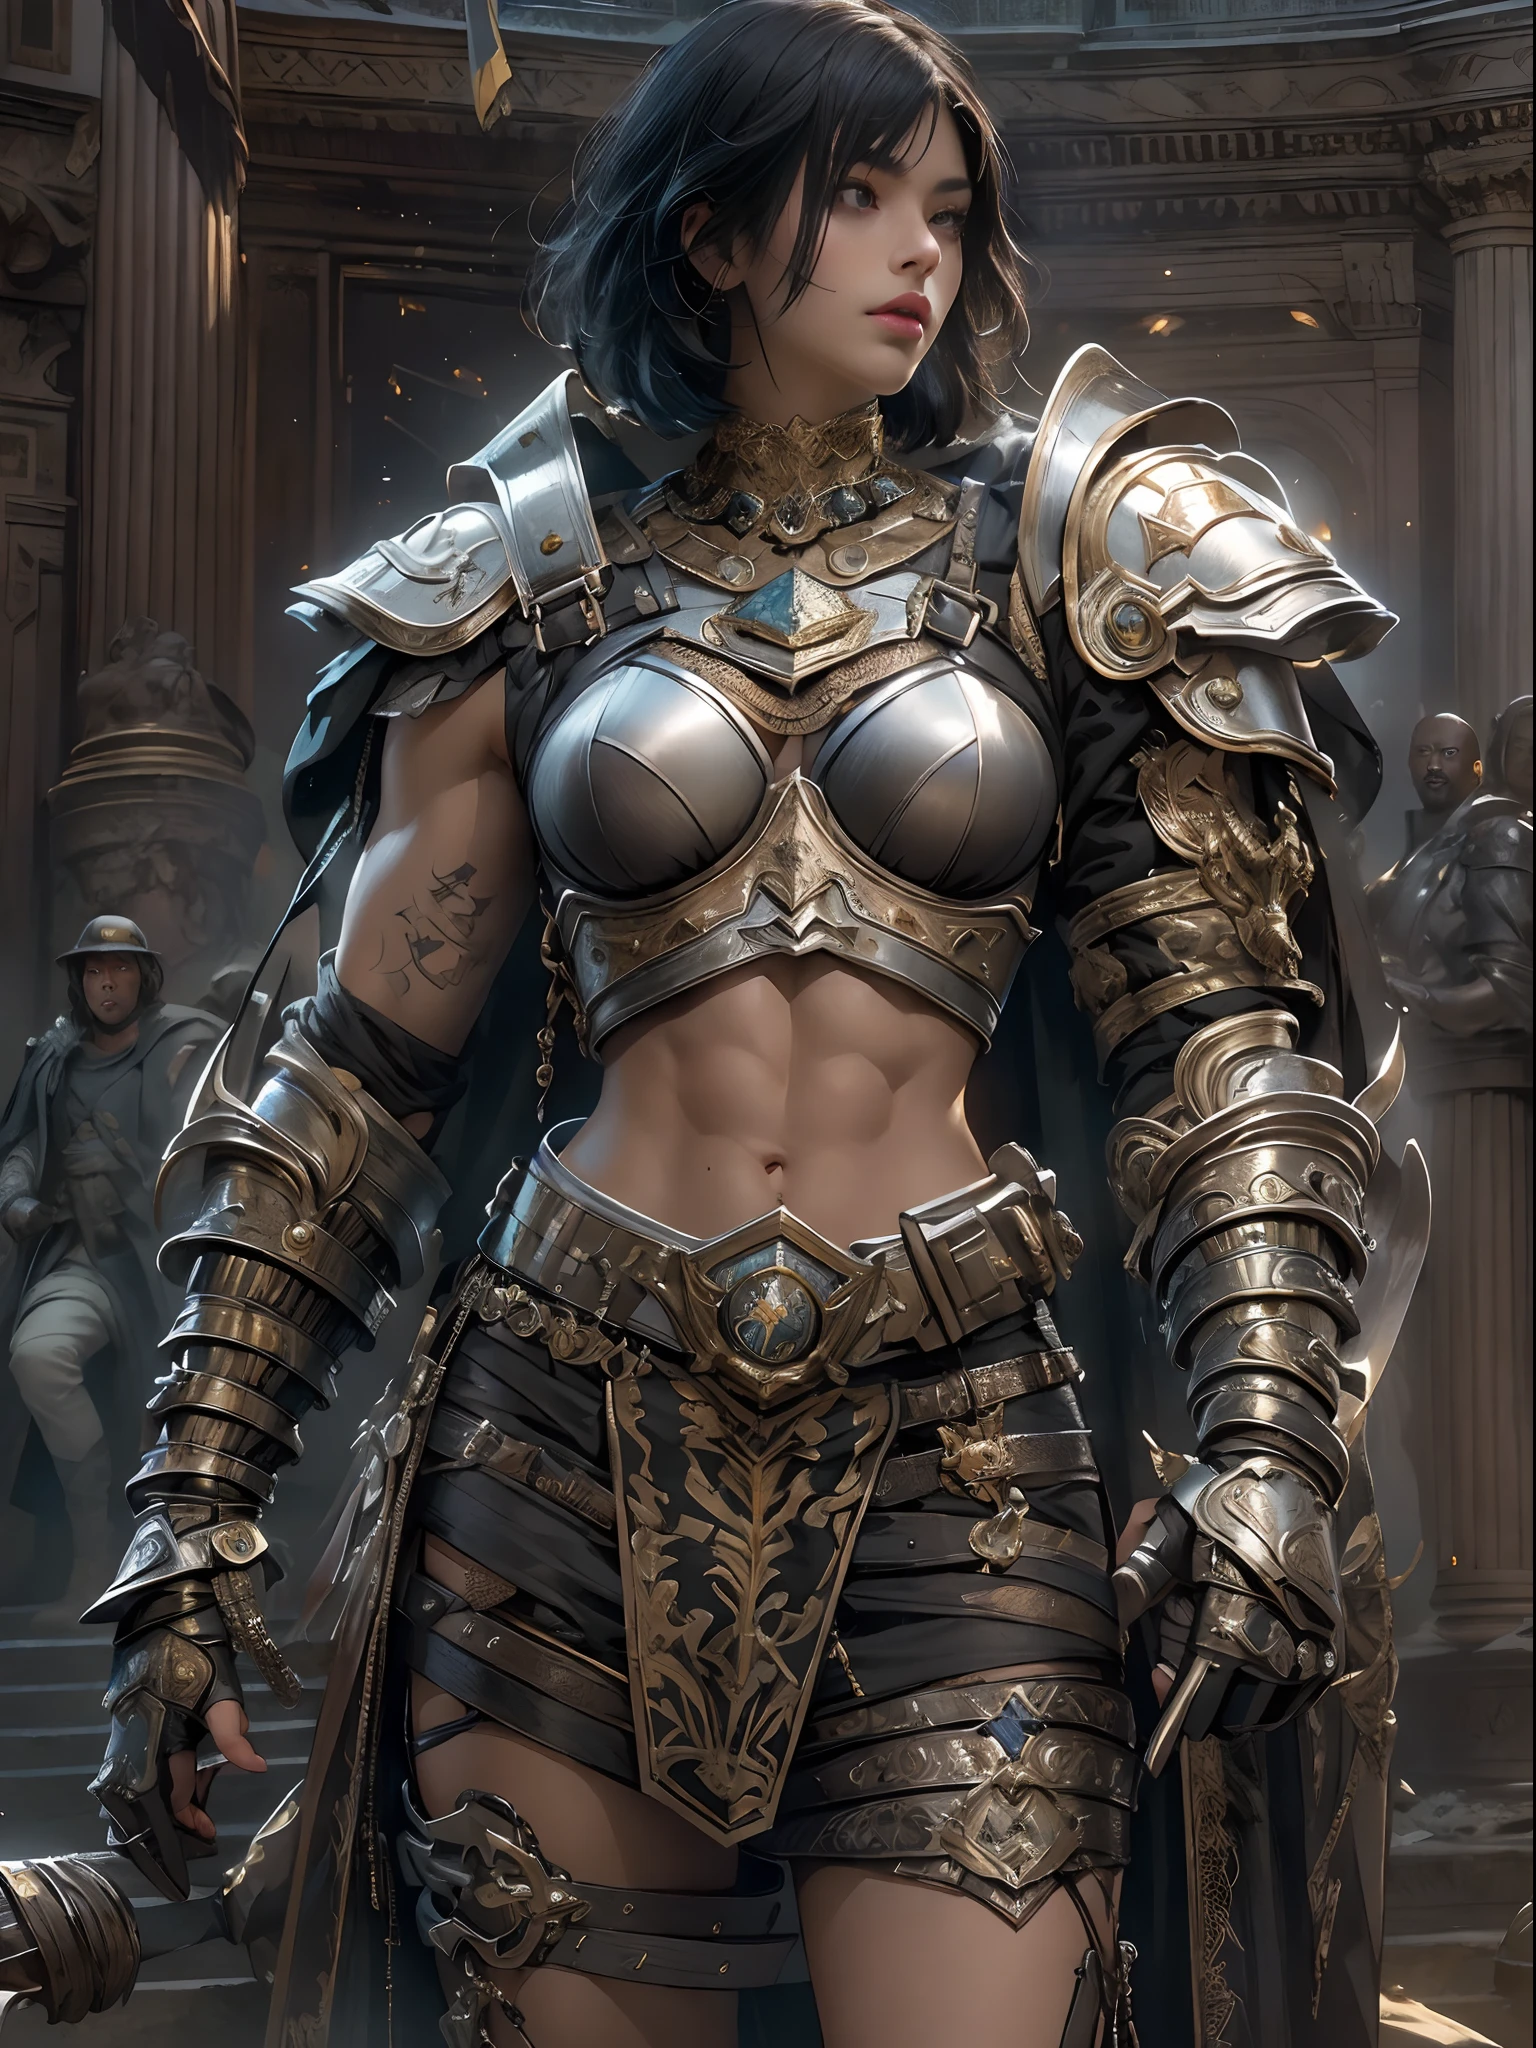 (((of the highest quality: 1.4))),(unparalleled masterpiece ever), (Ultra high definition),(Ultra realistic 8K CG), (((adult body))), (((1girl in))), ((( Bob Shorthair ))), Gladiators with perfect bodies,,Beautiful and well-groomed face,muscular body:1.4,Detailed breastplate, gauntlets、is standing, (Image from head to thigh),(( Black Hair Bob Shorthair )),, Simon Bisley's urban savage style,Detailed ancient Roman background,Clean abs, Complex equipment, Dark brown with white stars and gray and white stripes,,,s Armor, Poison tattoo